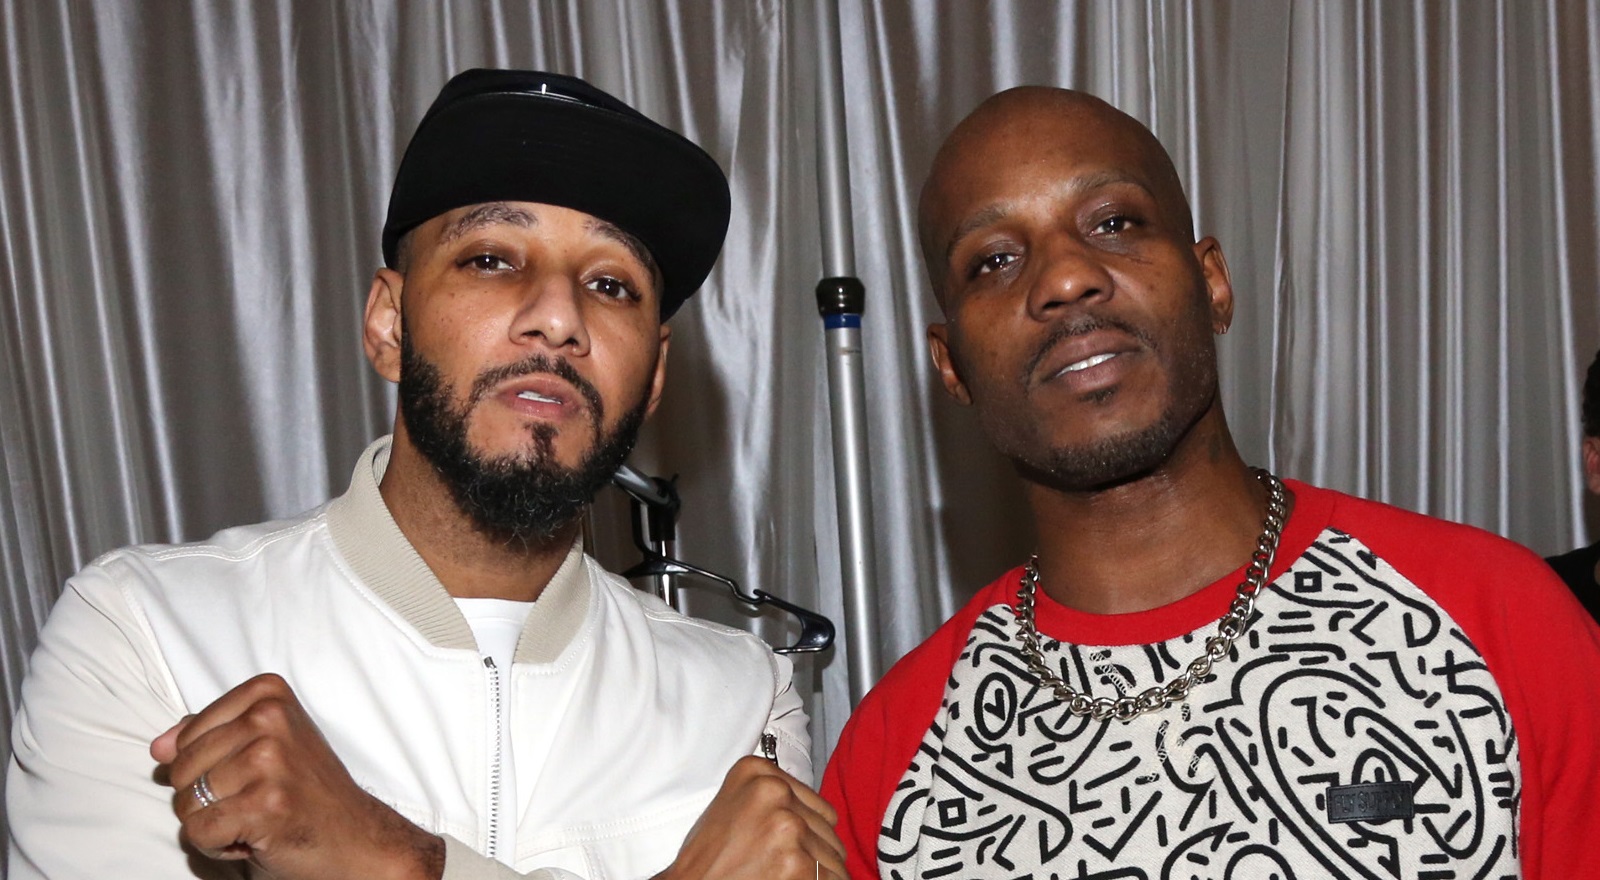 Listen To DMX’s Posthumously Released New Song – ‘Been To War’ (ft. French Montana & Swizz Beatz)